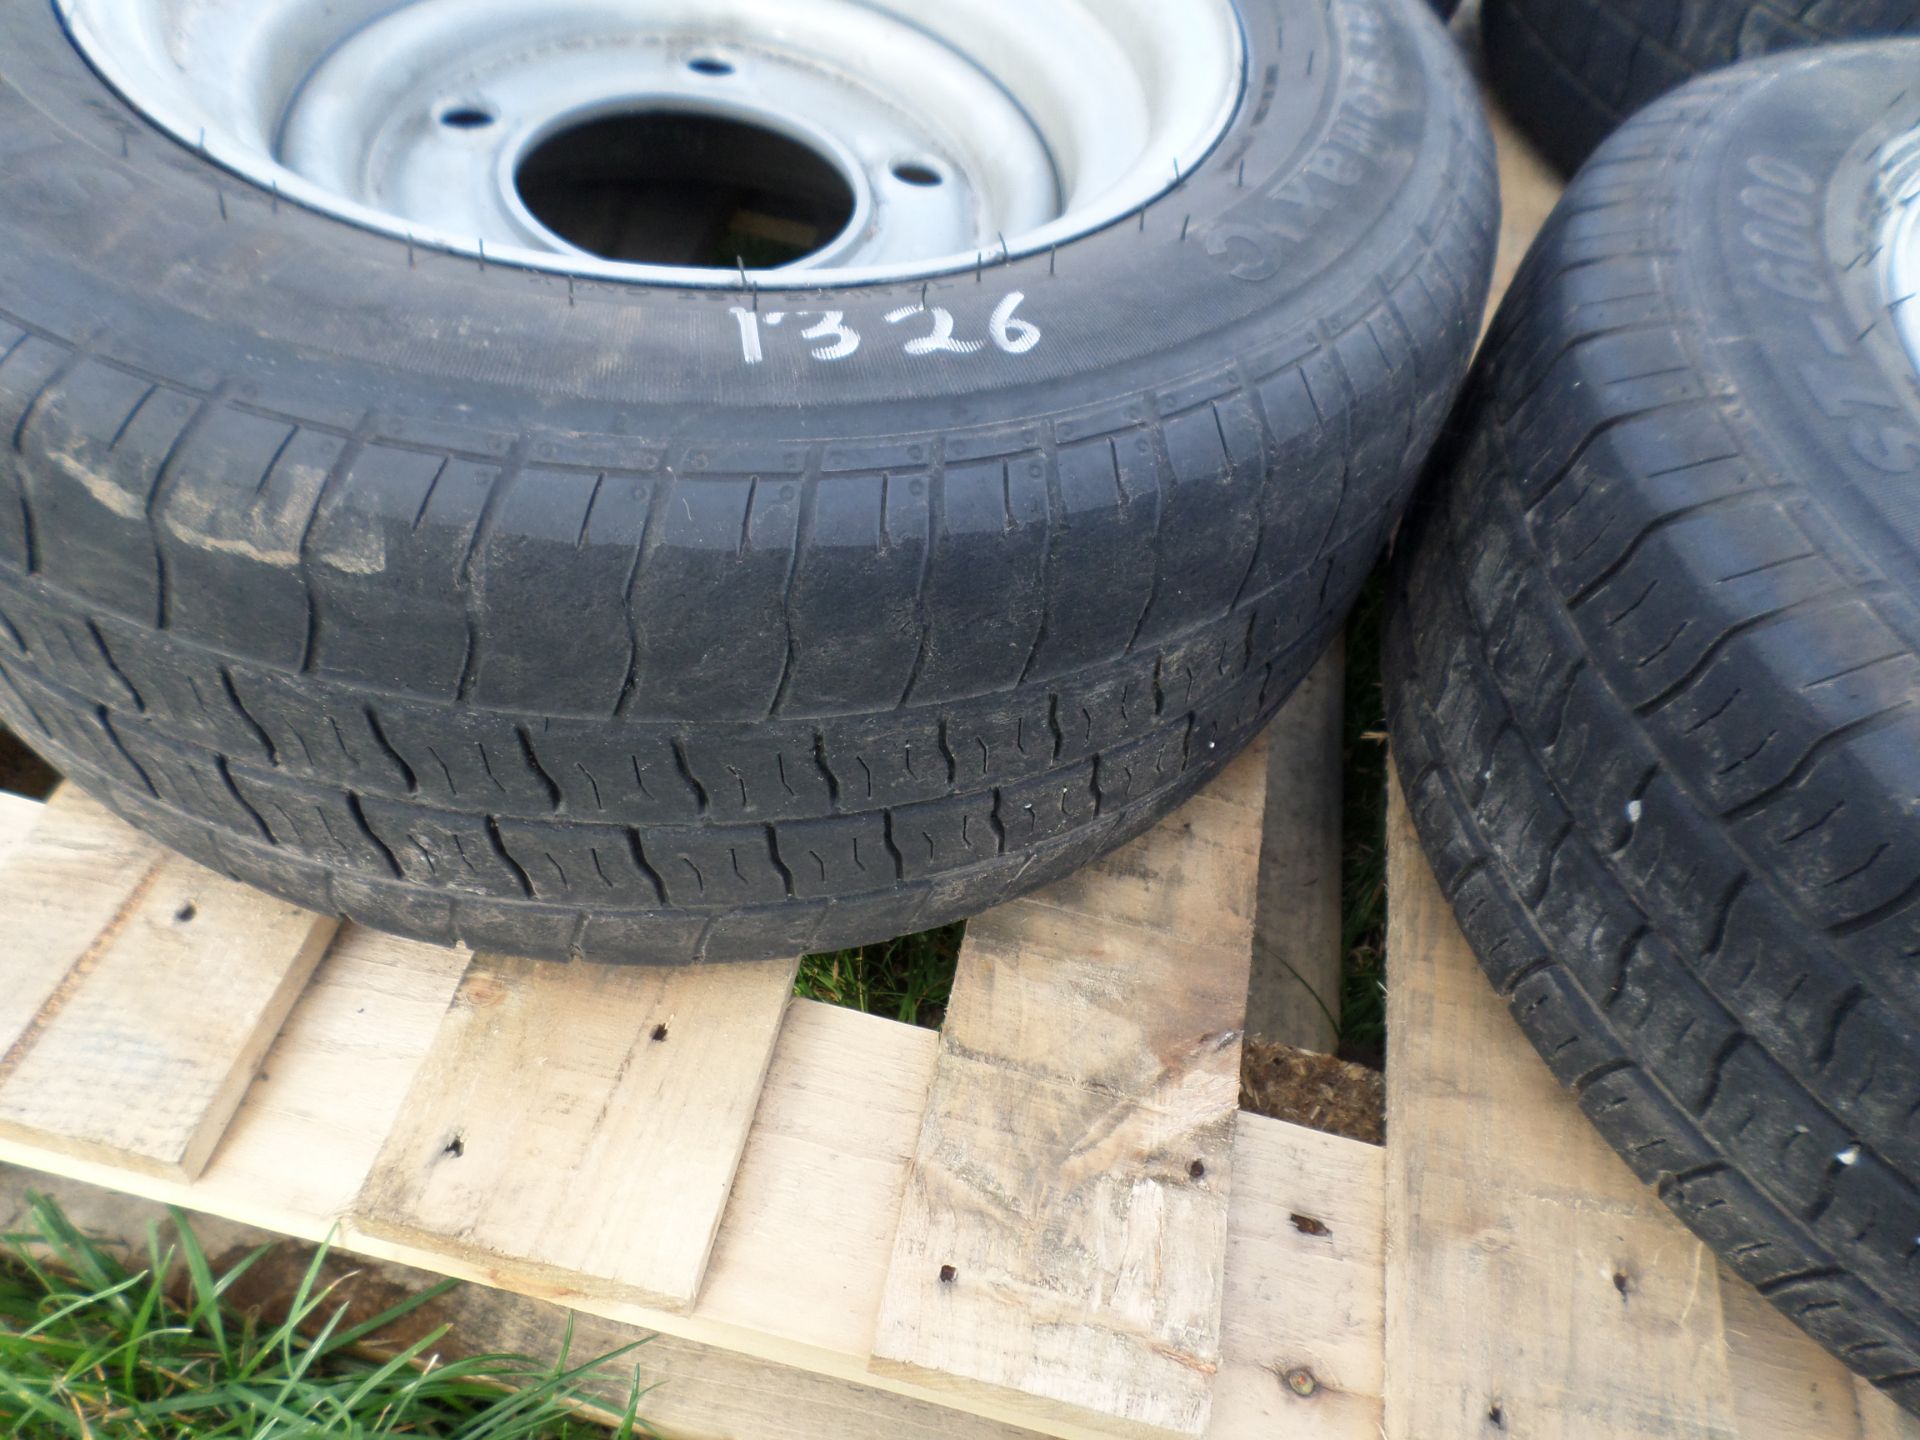 Set of 4 Ifor Williams 195/13 wheels/tyres, 2020 - Image 2 of 2